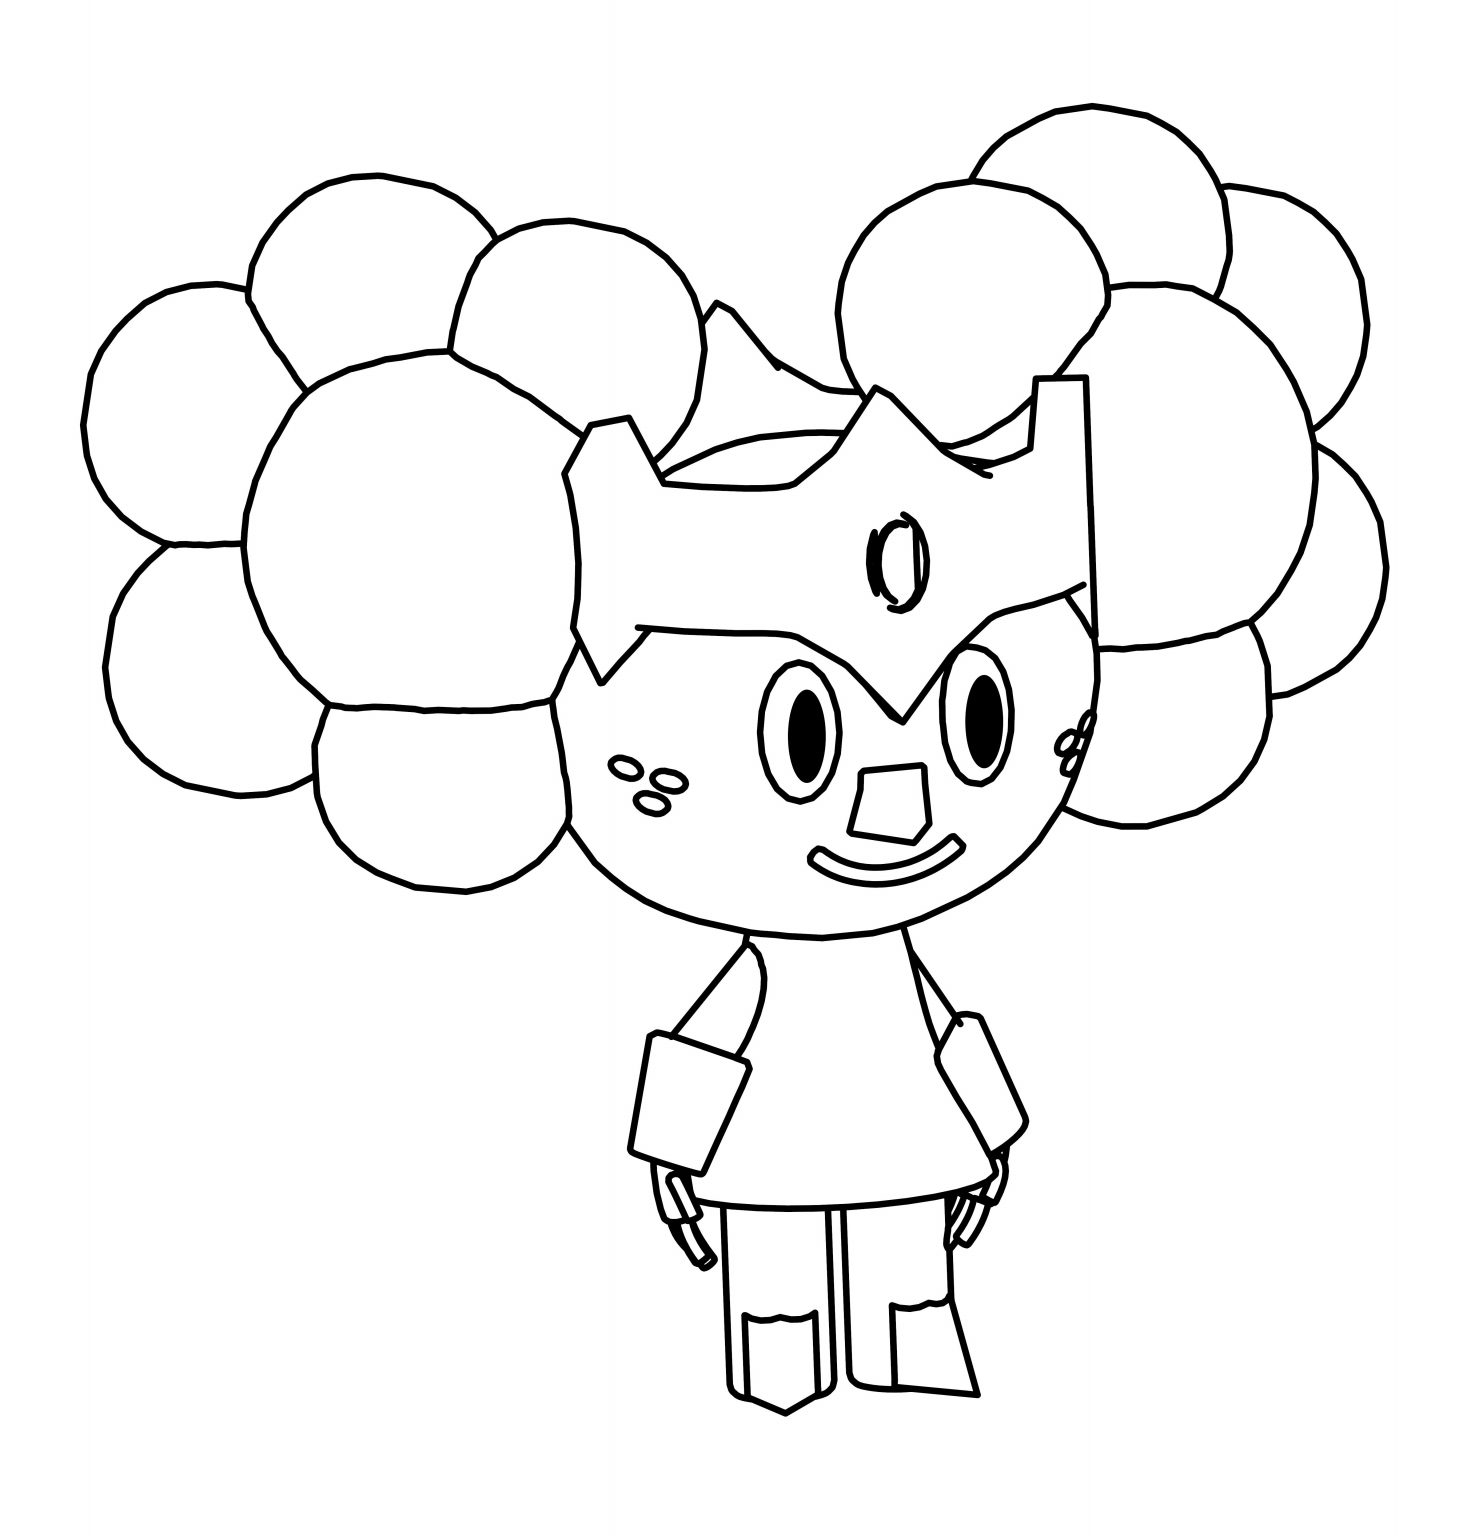 Toon Small Princess Character Coloring Page - Wecoloringpage.com